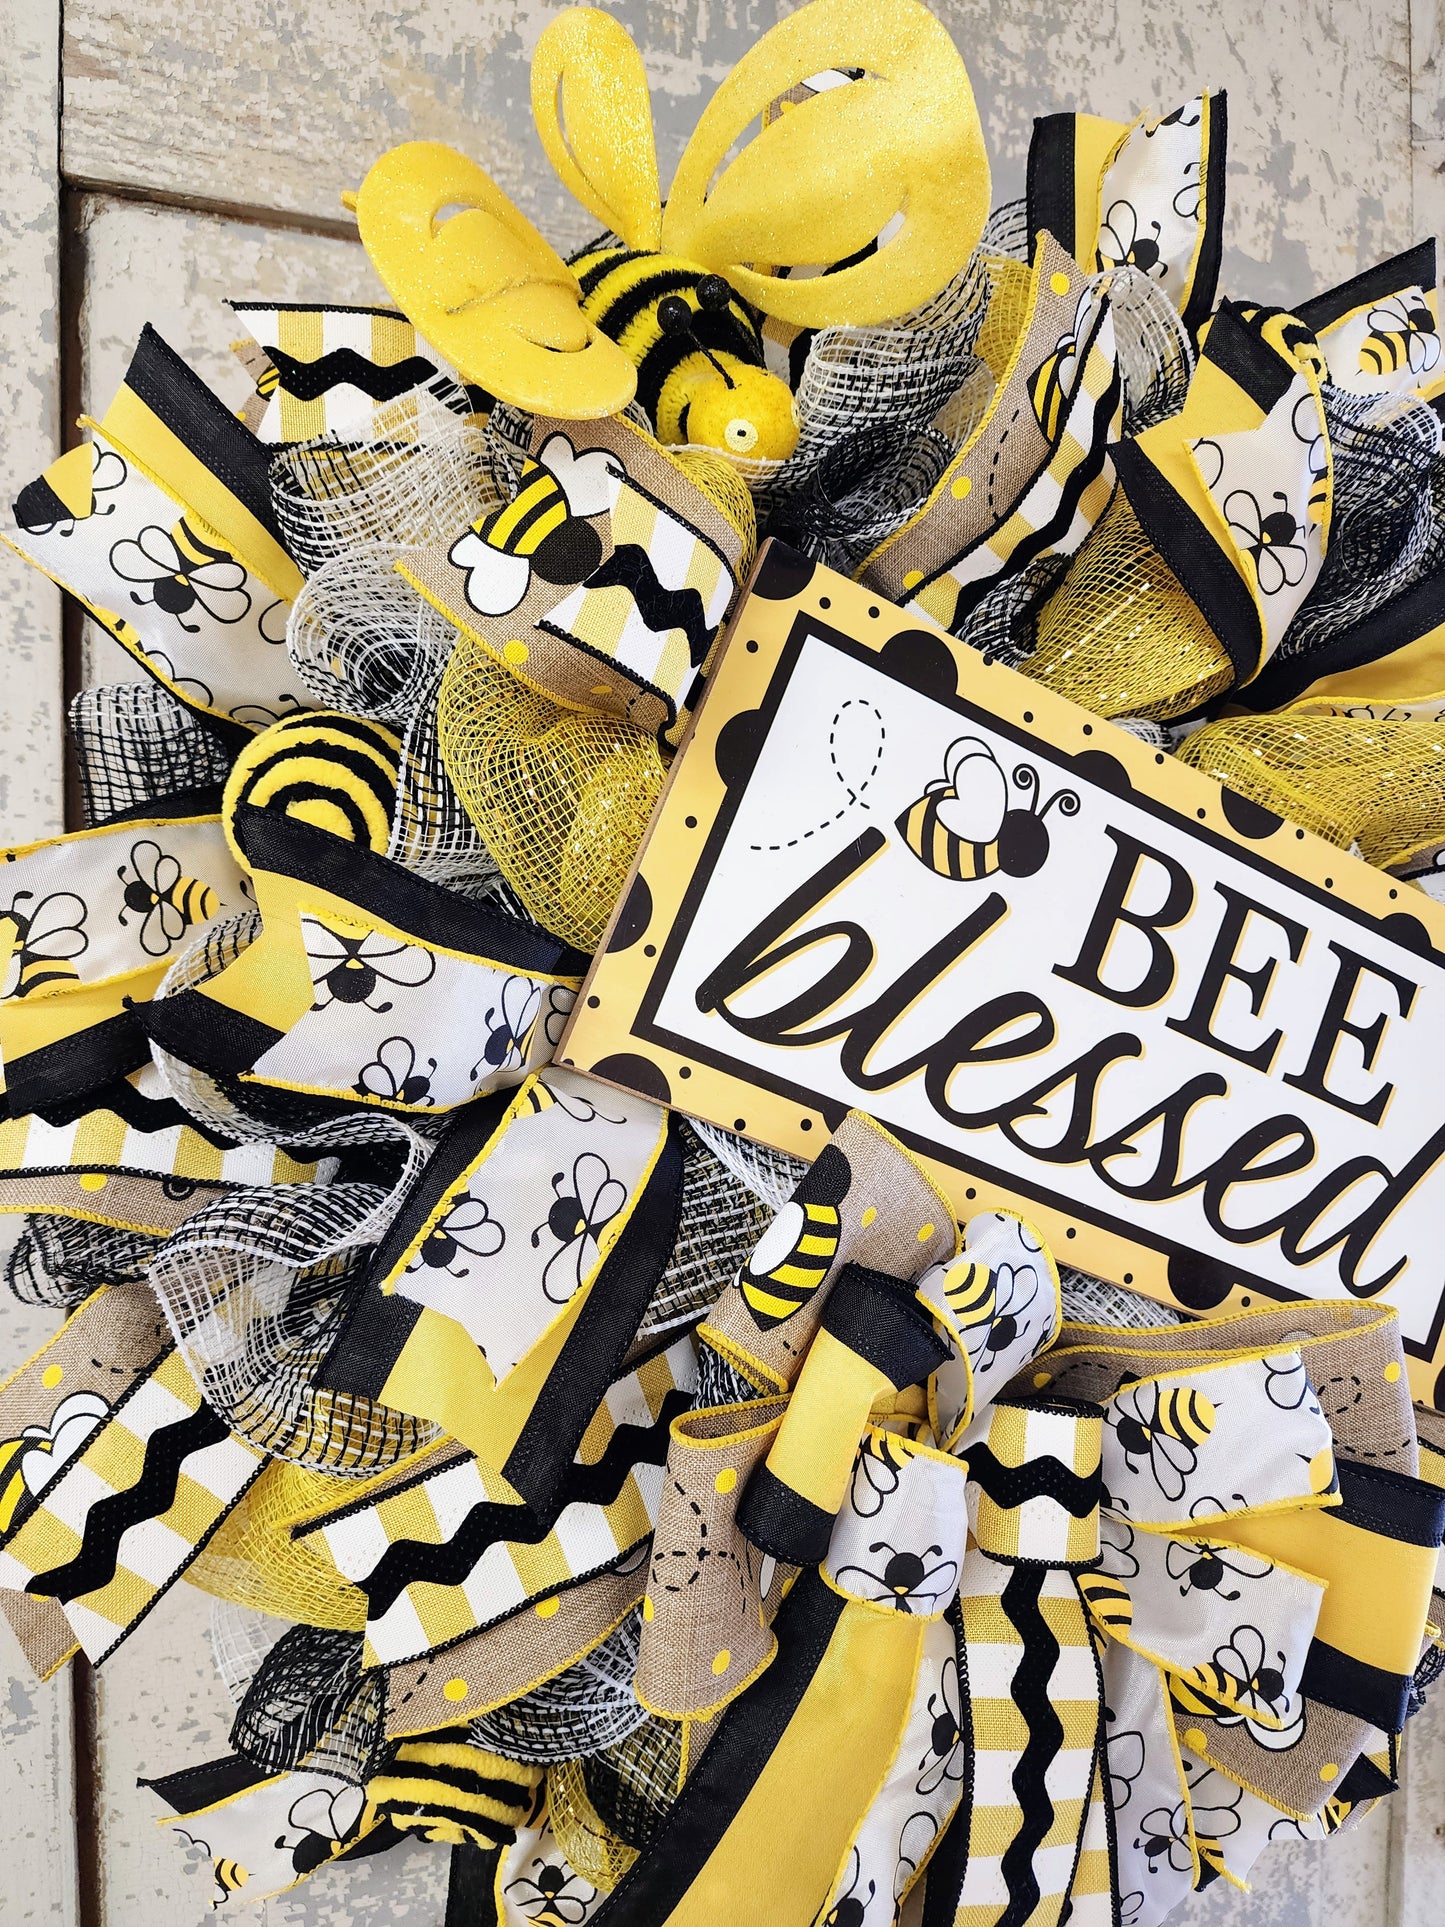 Bee Blessed